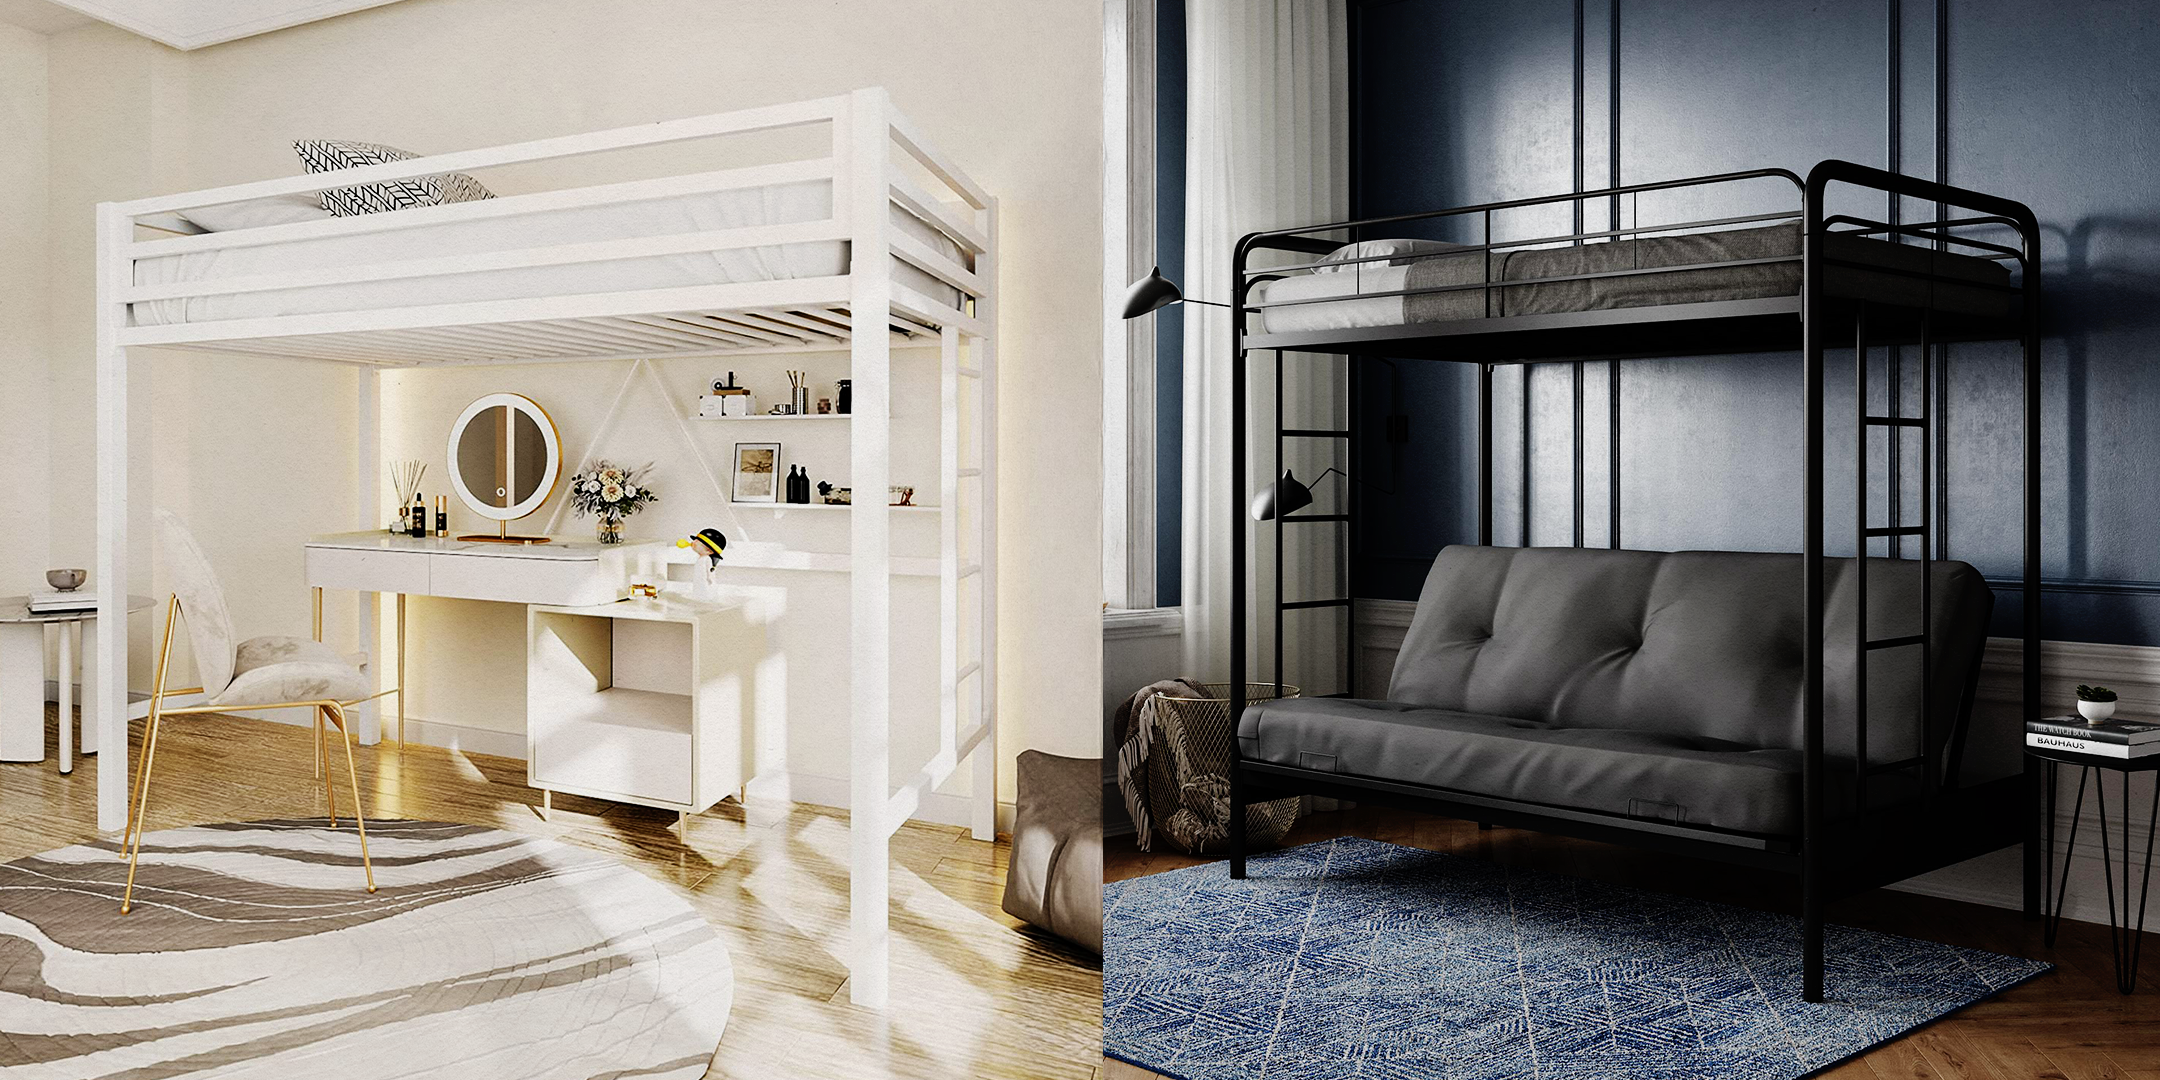 Cool Bunk Bed Ideas for Small Rooms - Bless'er House